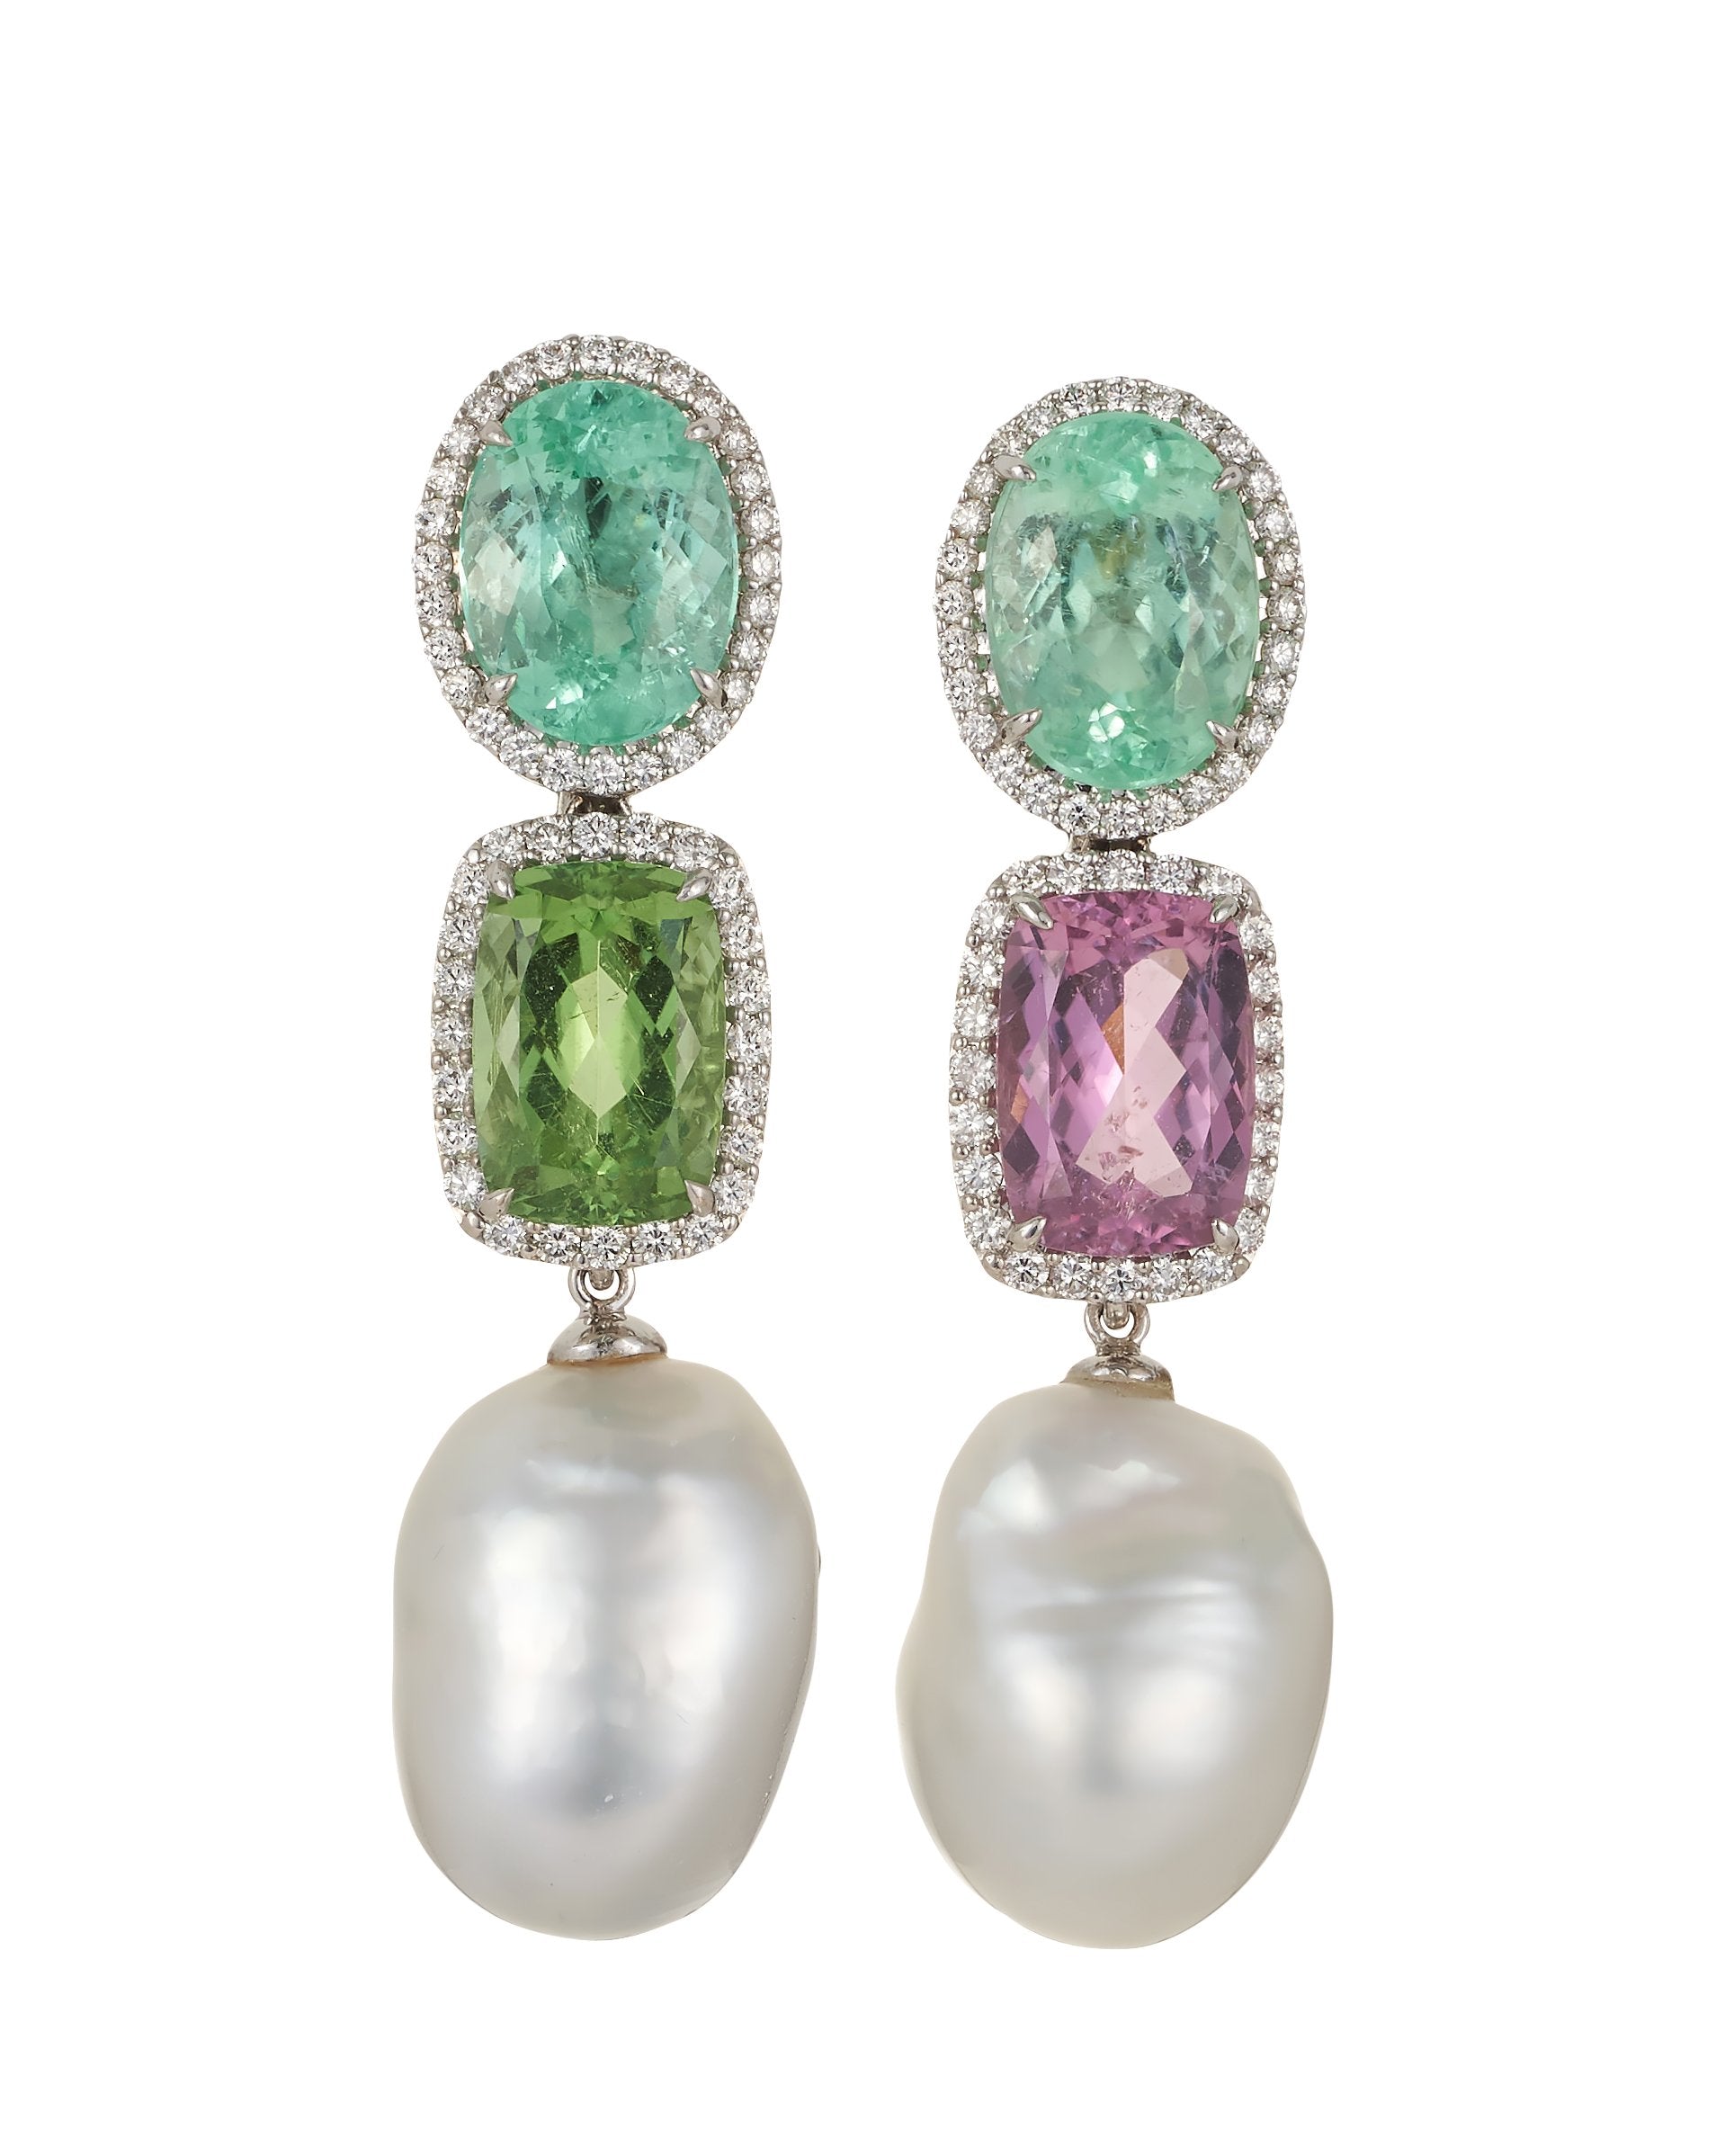 South Sea Pearl, tourmaline and diamond earrings, crafted in 18 karat white gold.